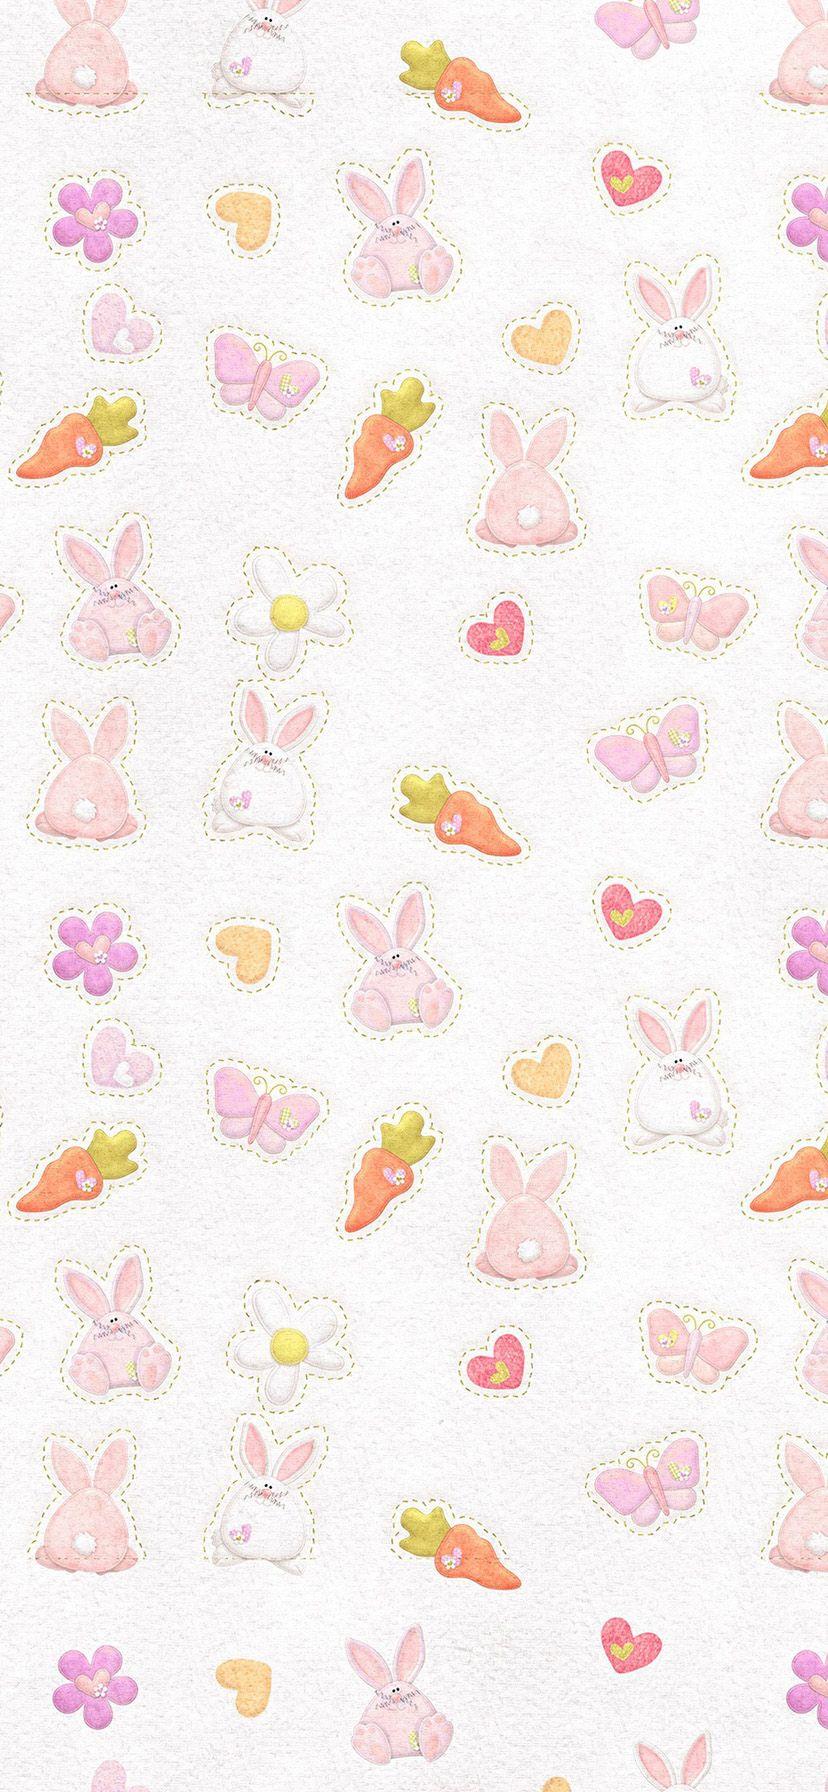 Bunny iPhone Wallpapers - Top Free Bunny iPhone Backgrounds ...